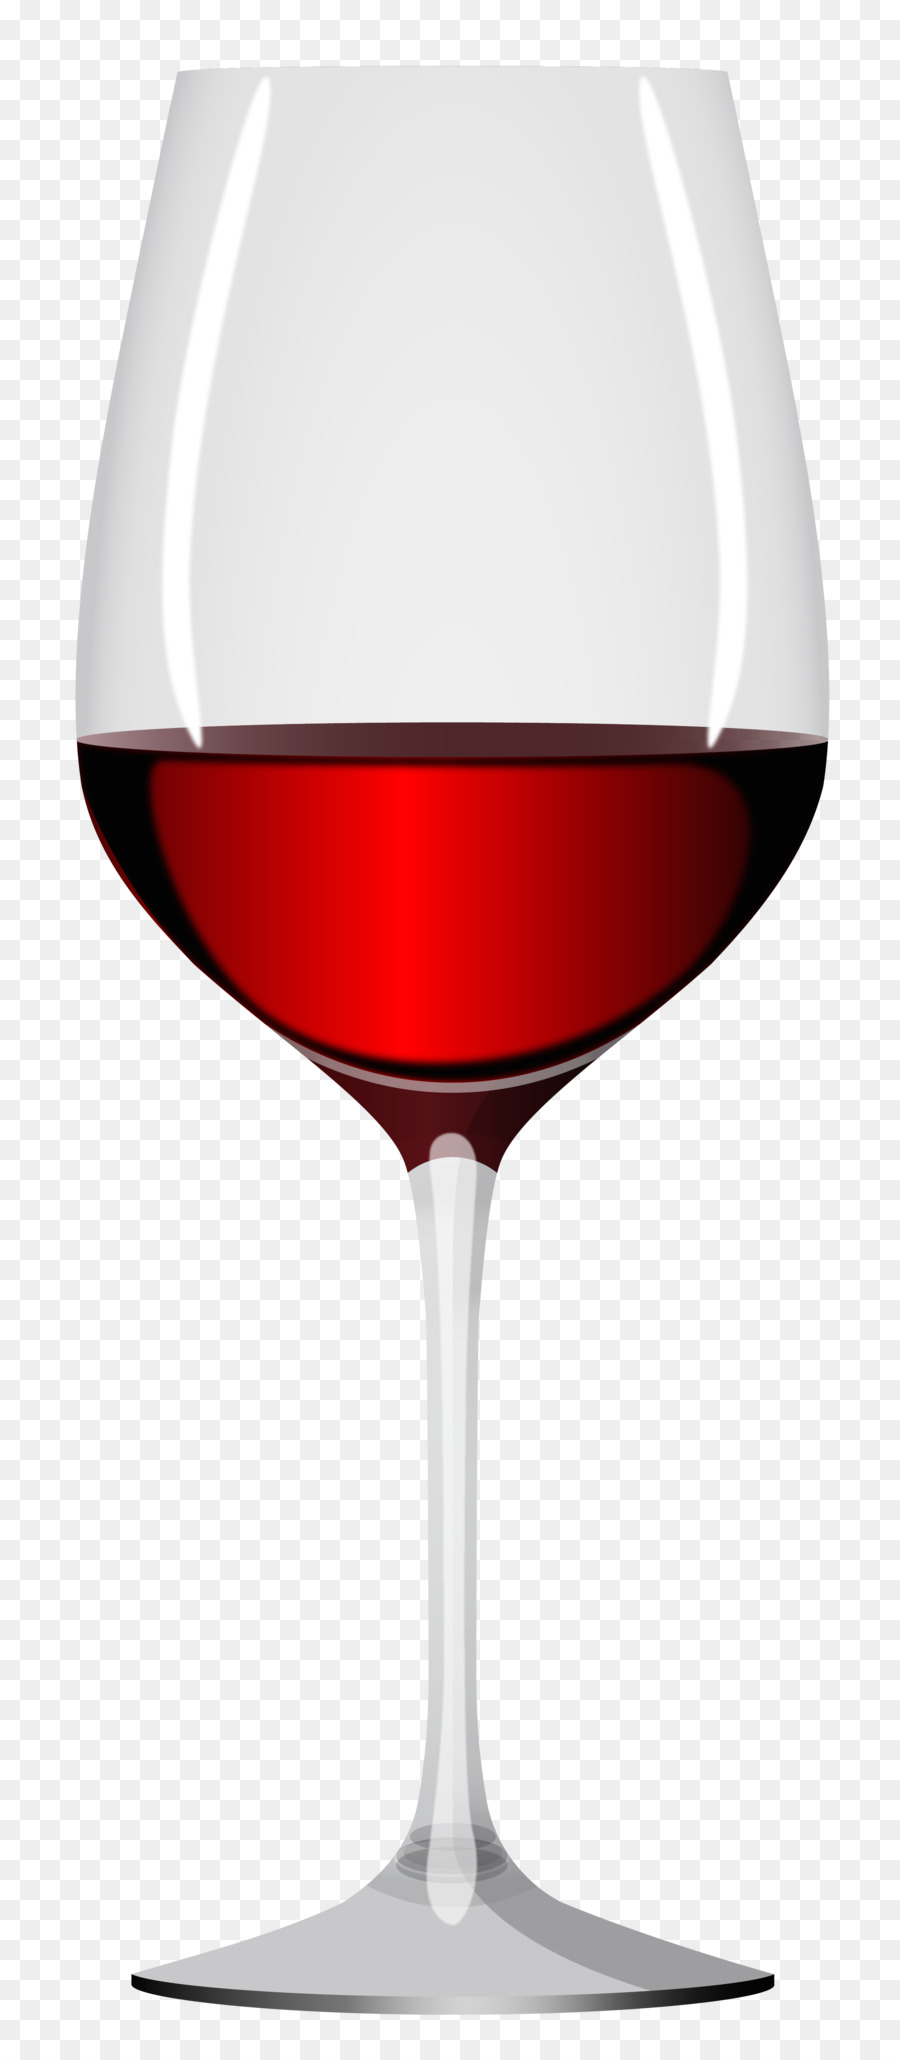 Red Wine White wine Shiraz Cabernet Sauvignon - Wineglass png download - 2210*5020 - Free Transparent Red Wine png Download.